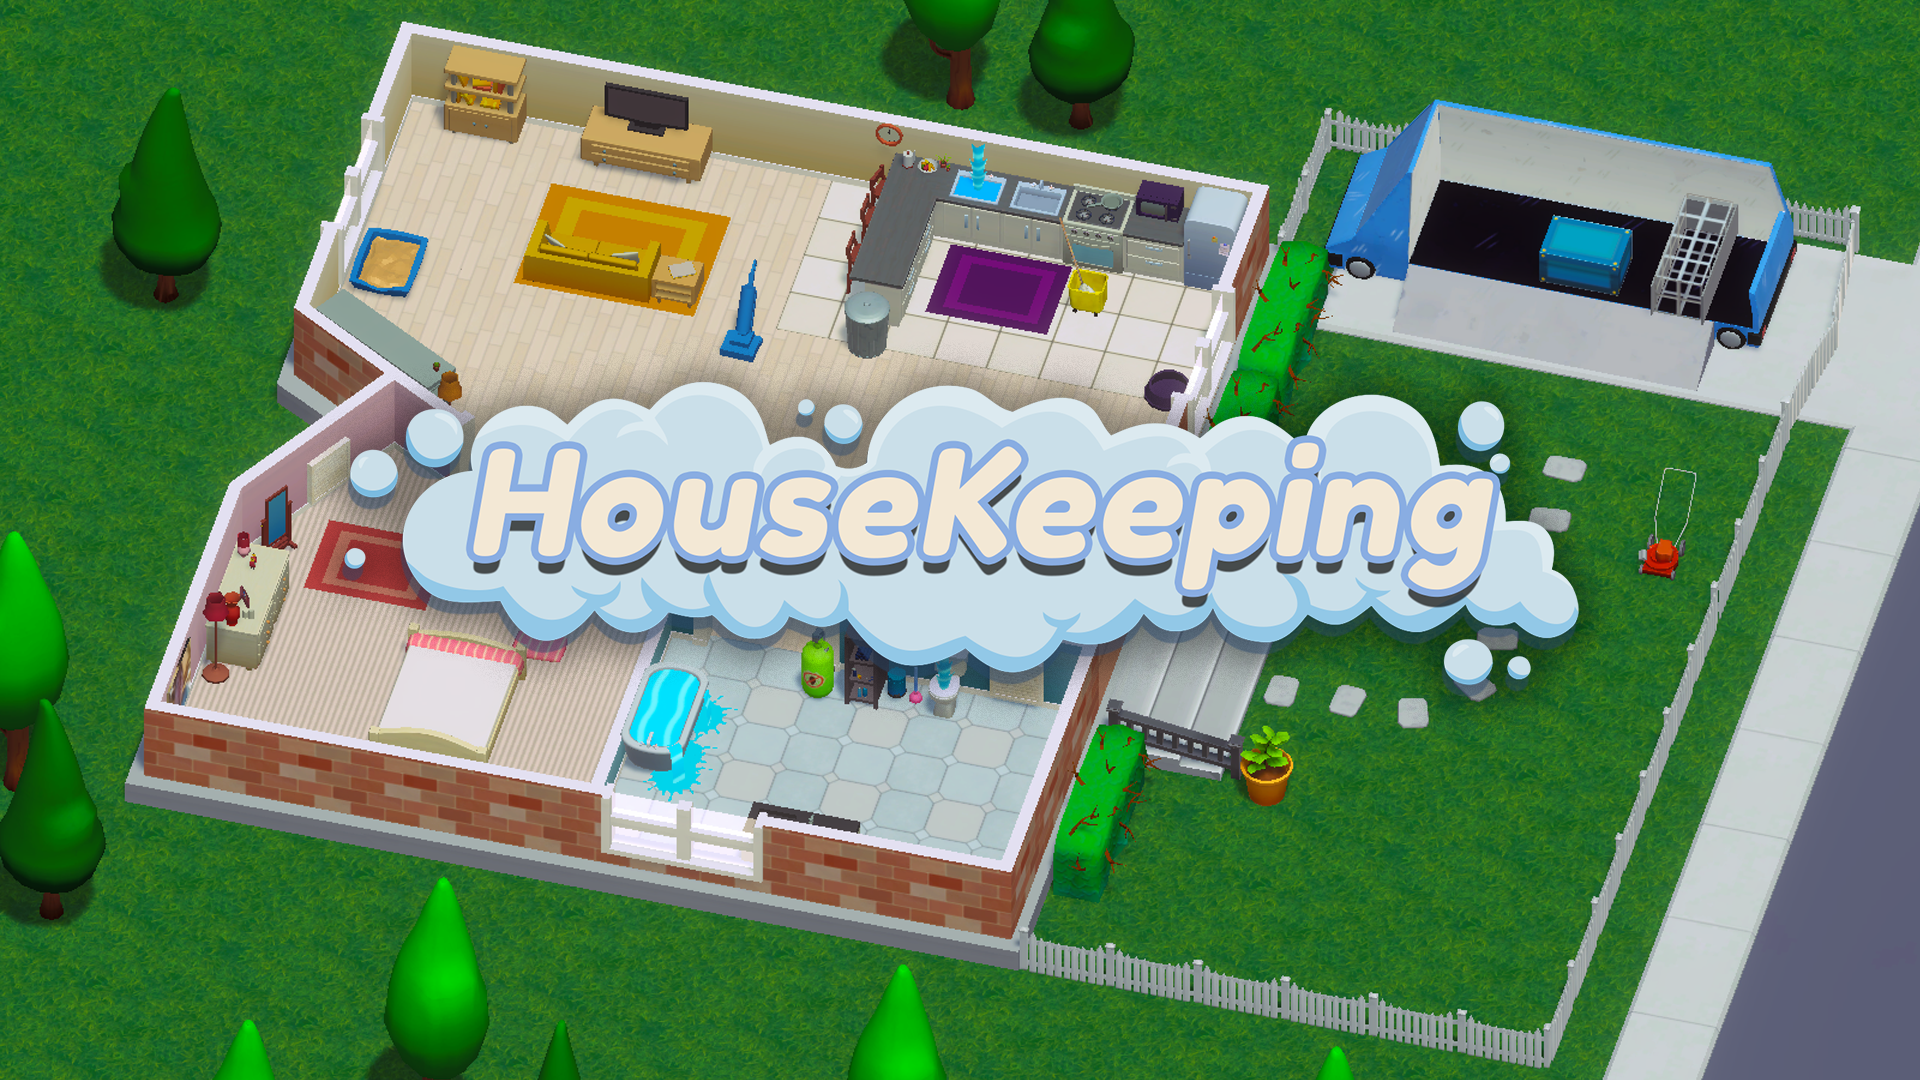 - A promotional image for House Keeping